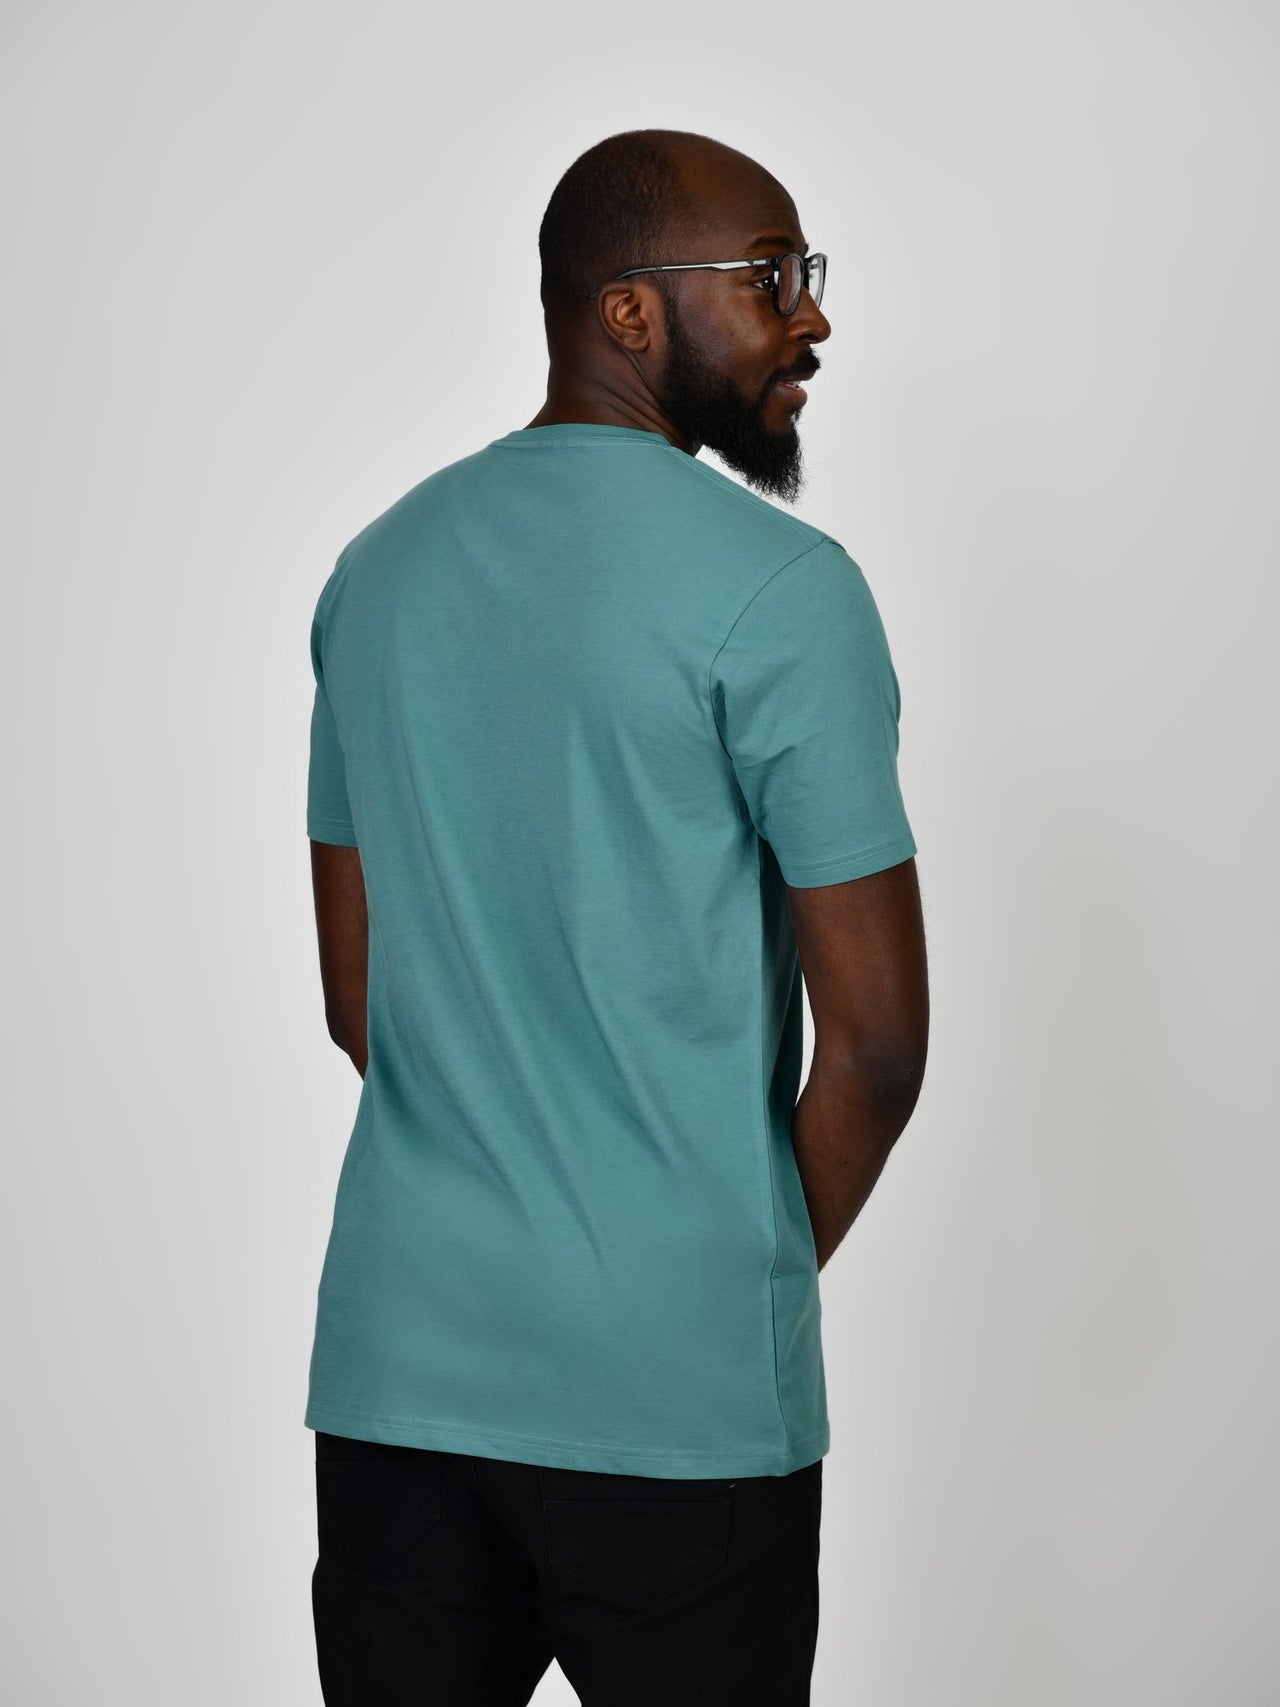 A shot from behind of a tall and slim guy in the studio and wearing a teal L tall slim v-neck t-shirt.